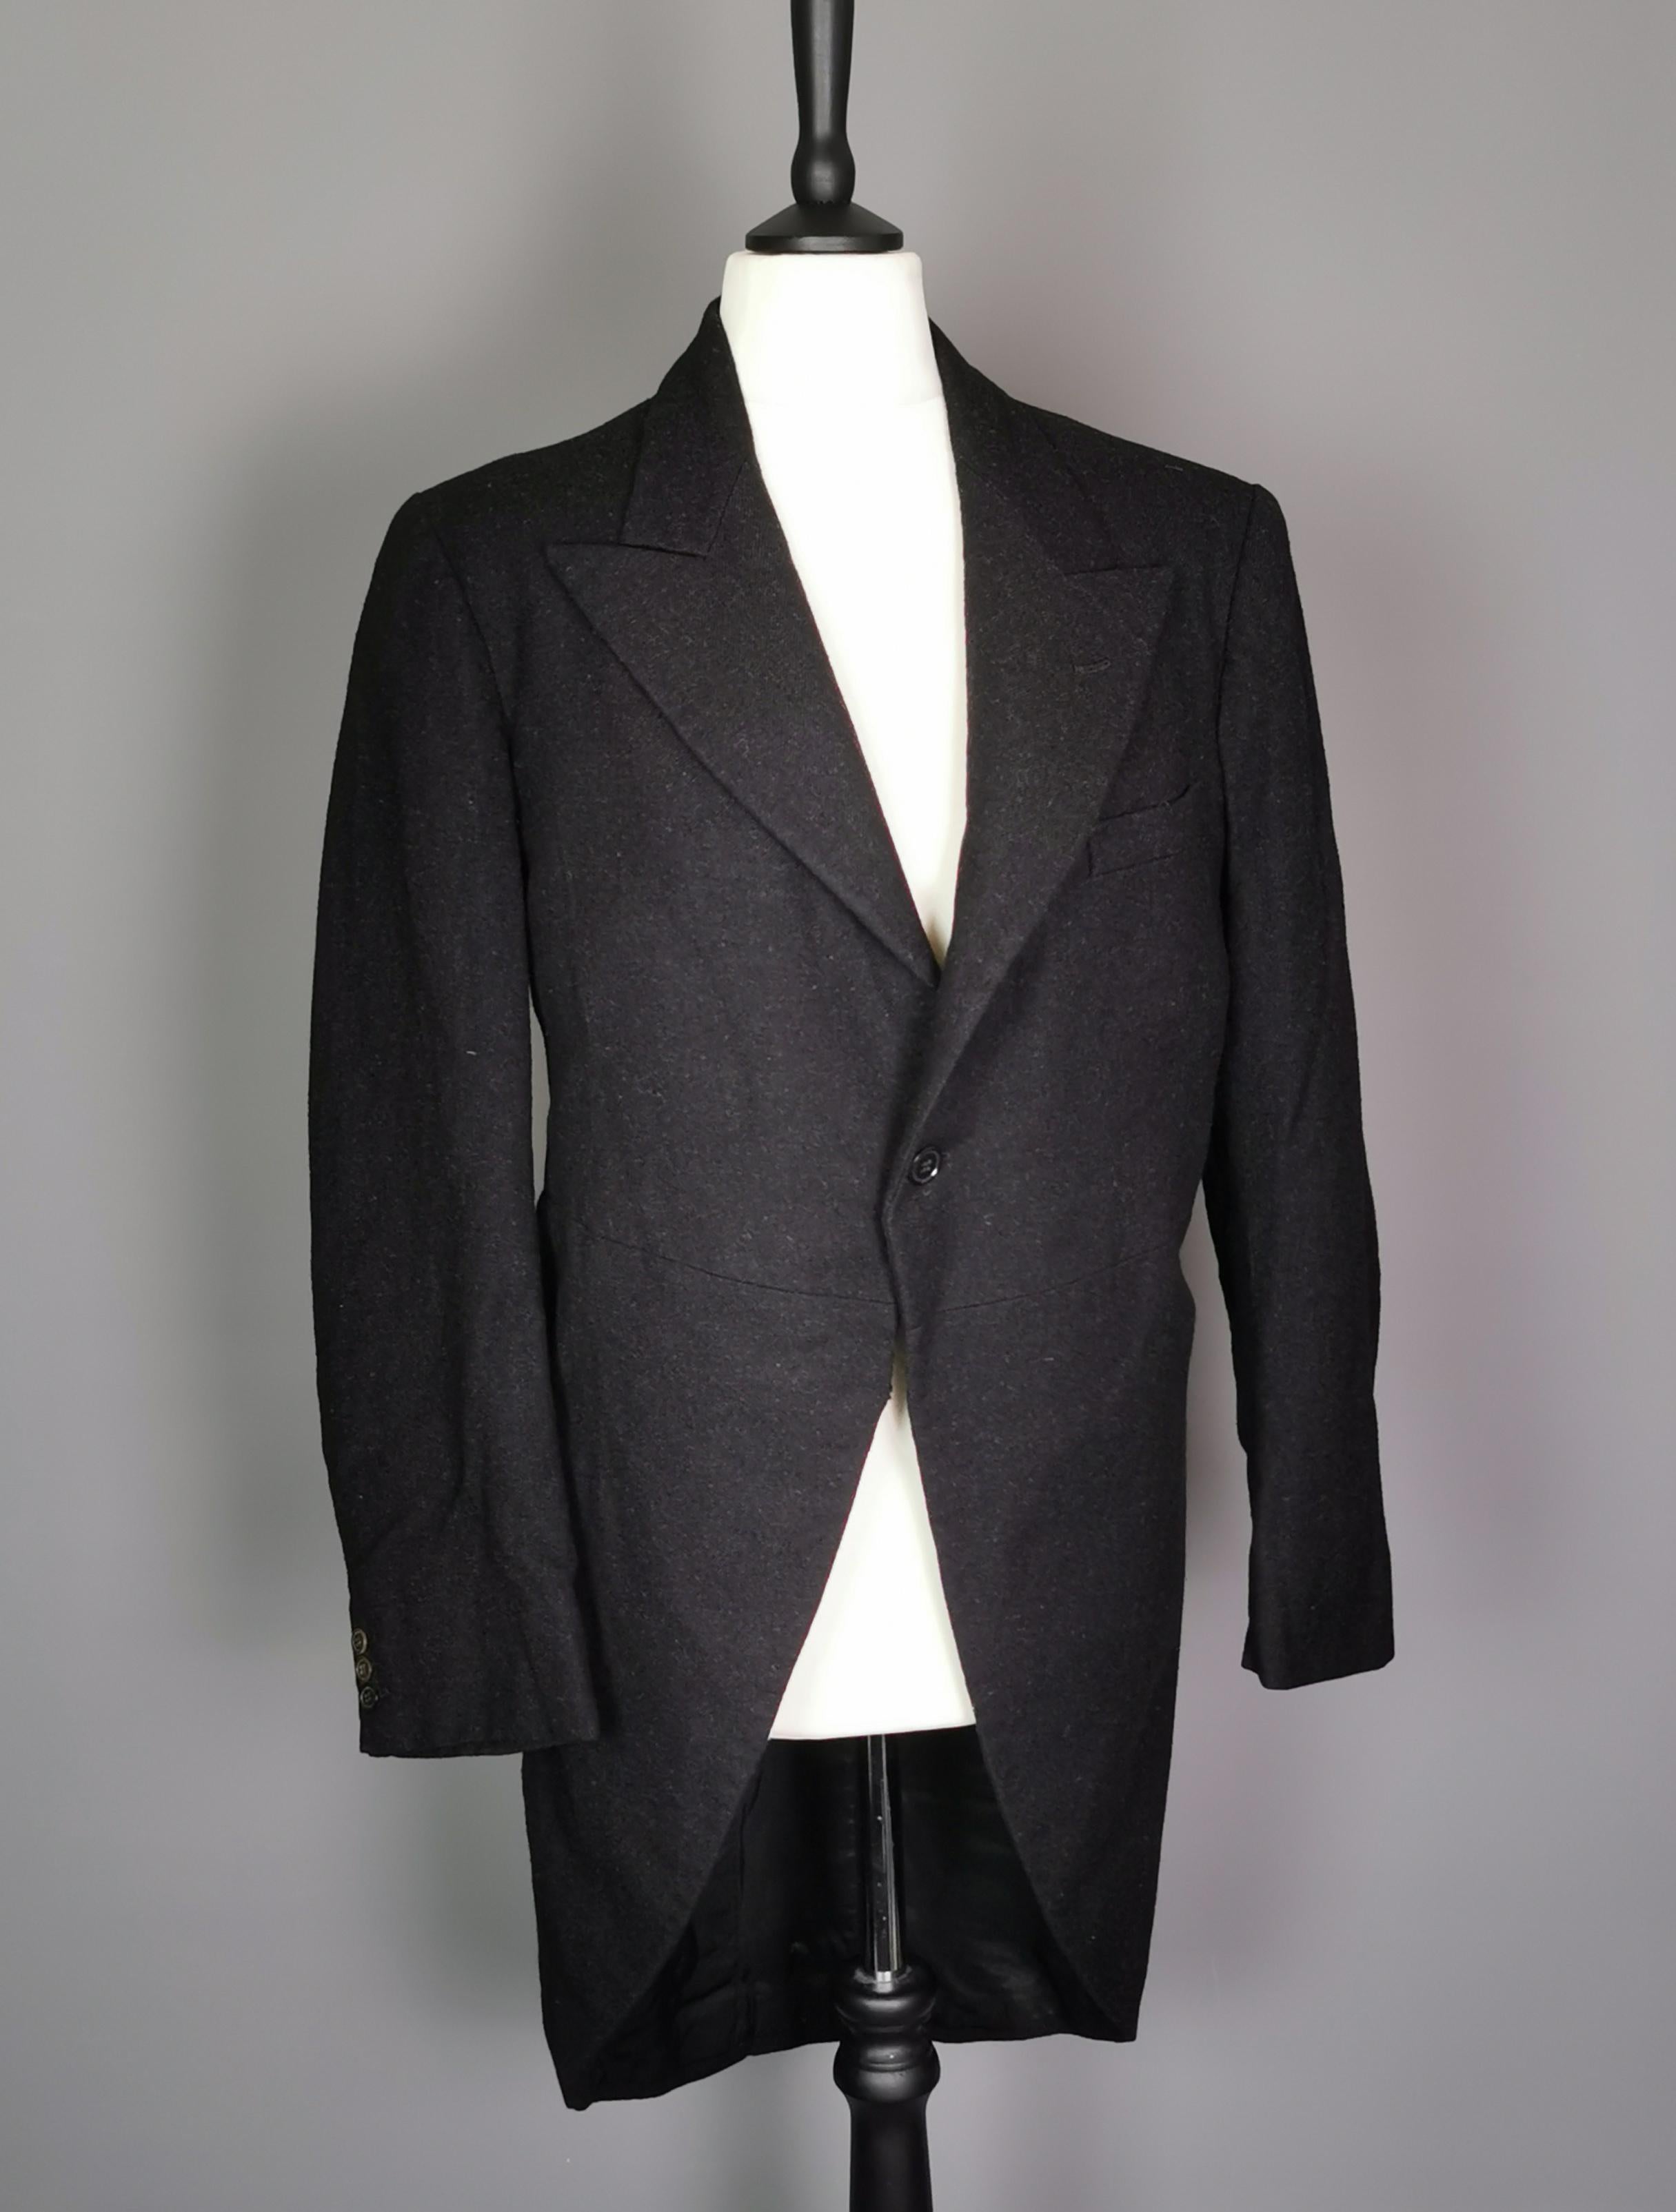 A stylish Gentleman's, vintage c1930s, black wool tailcoat.

Made in England from a strong and thick wool blend knit, it has a graduated cutaway front and fastens with a single button.

It has black plastic buttons up the cuffs and to the